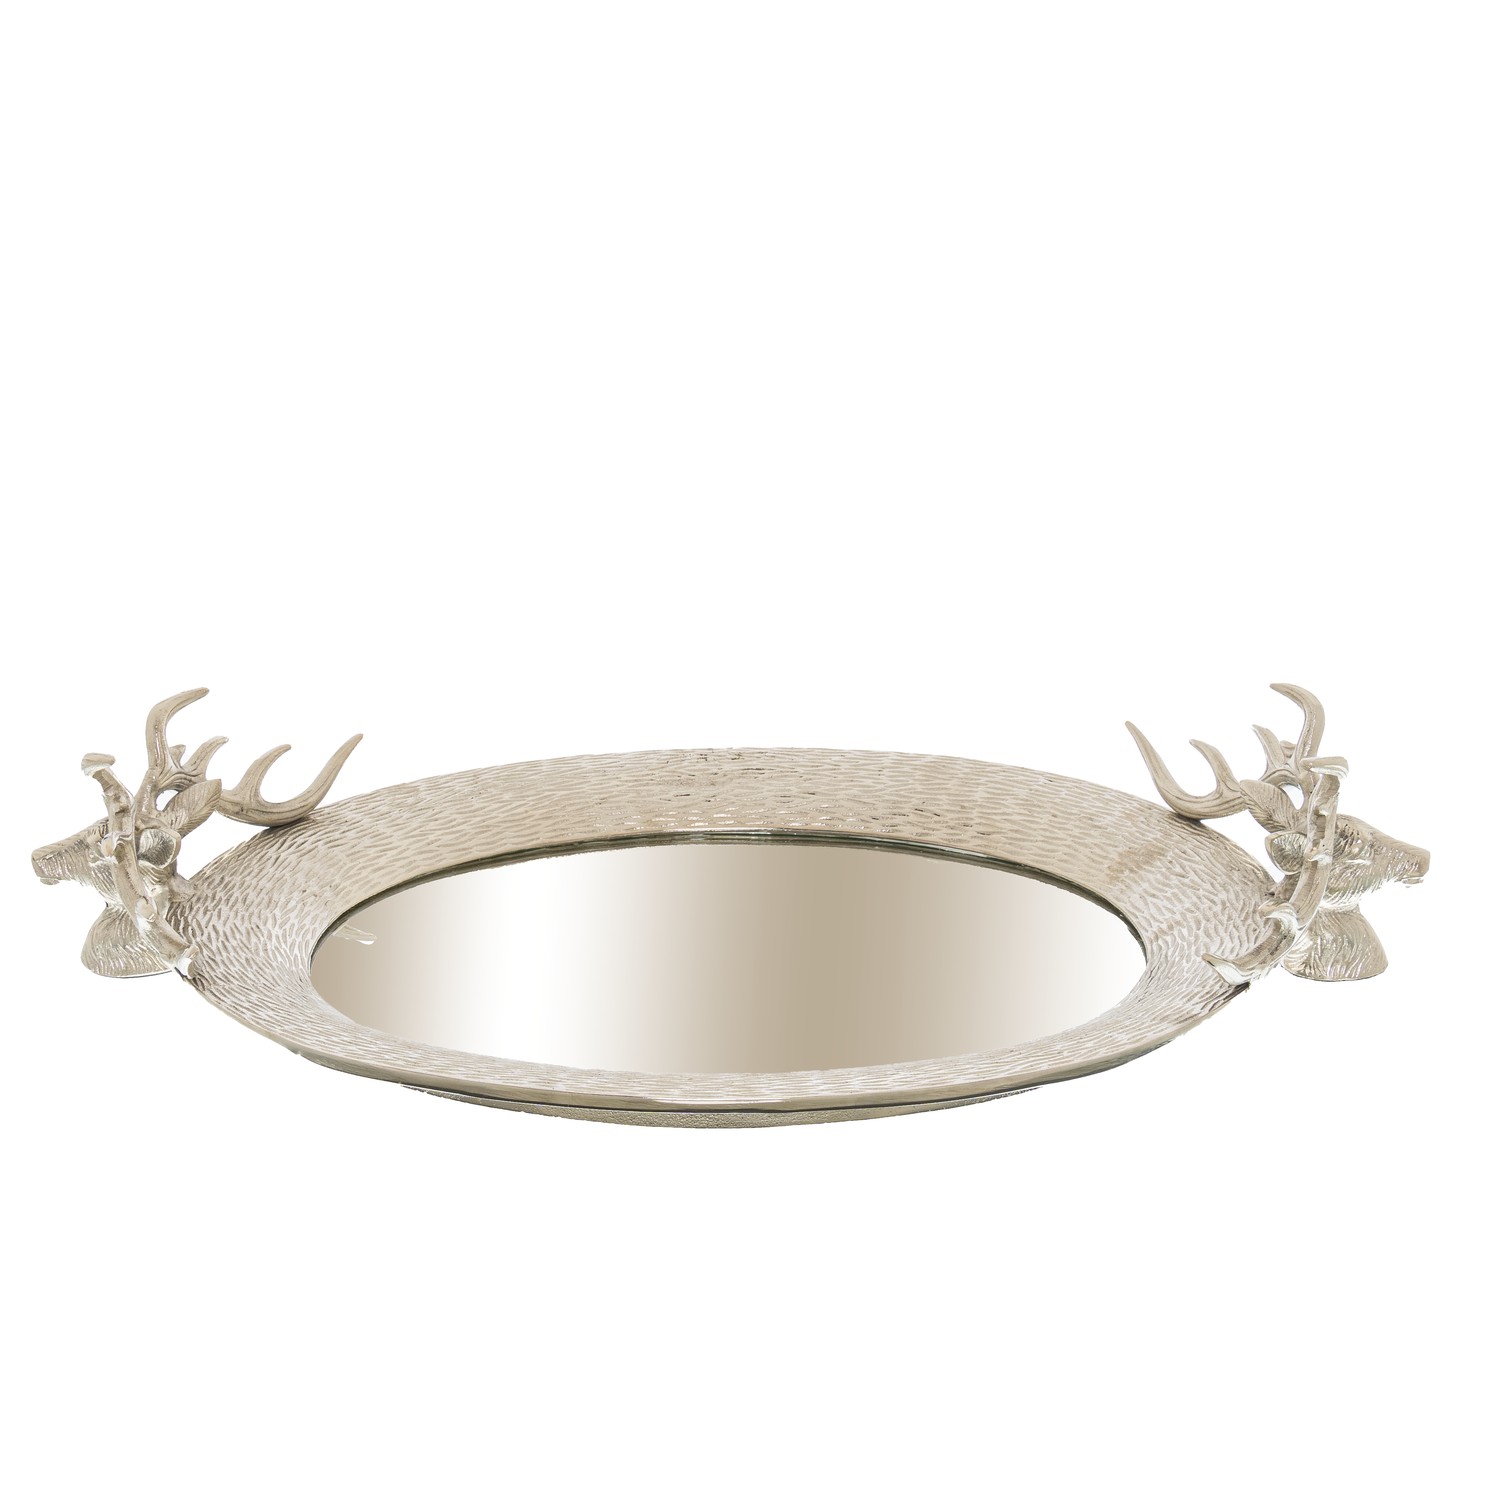 Large Mirrored Tray With Stag Heads - Image 3